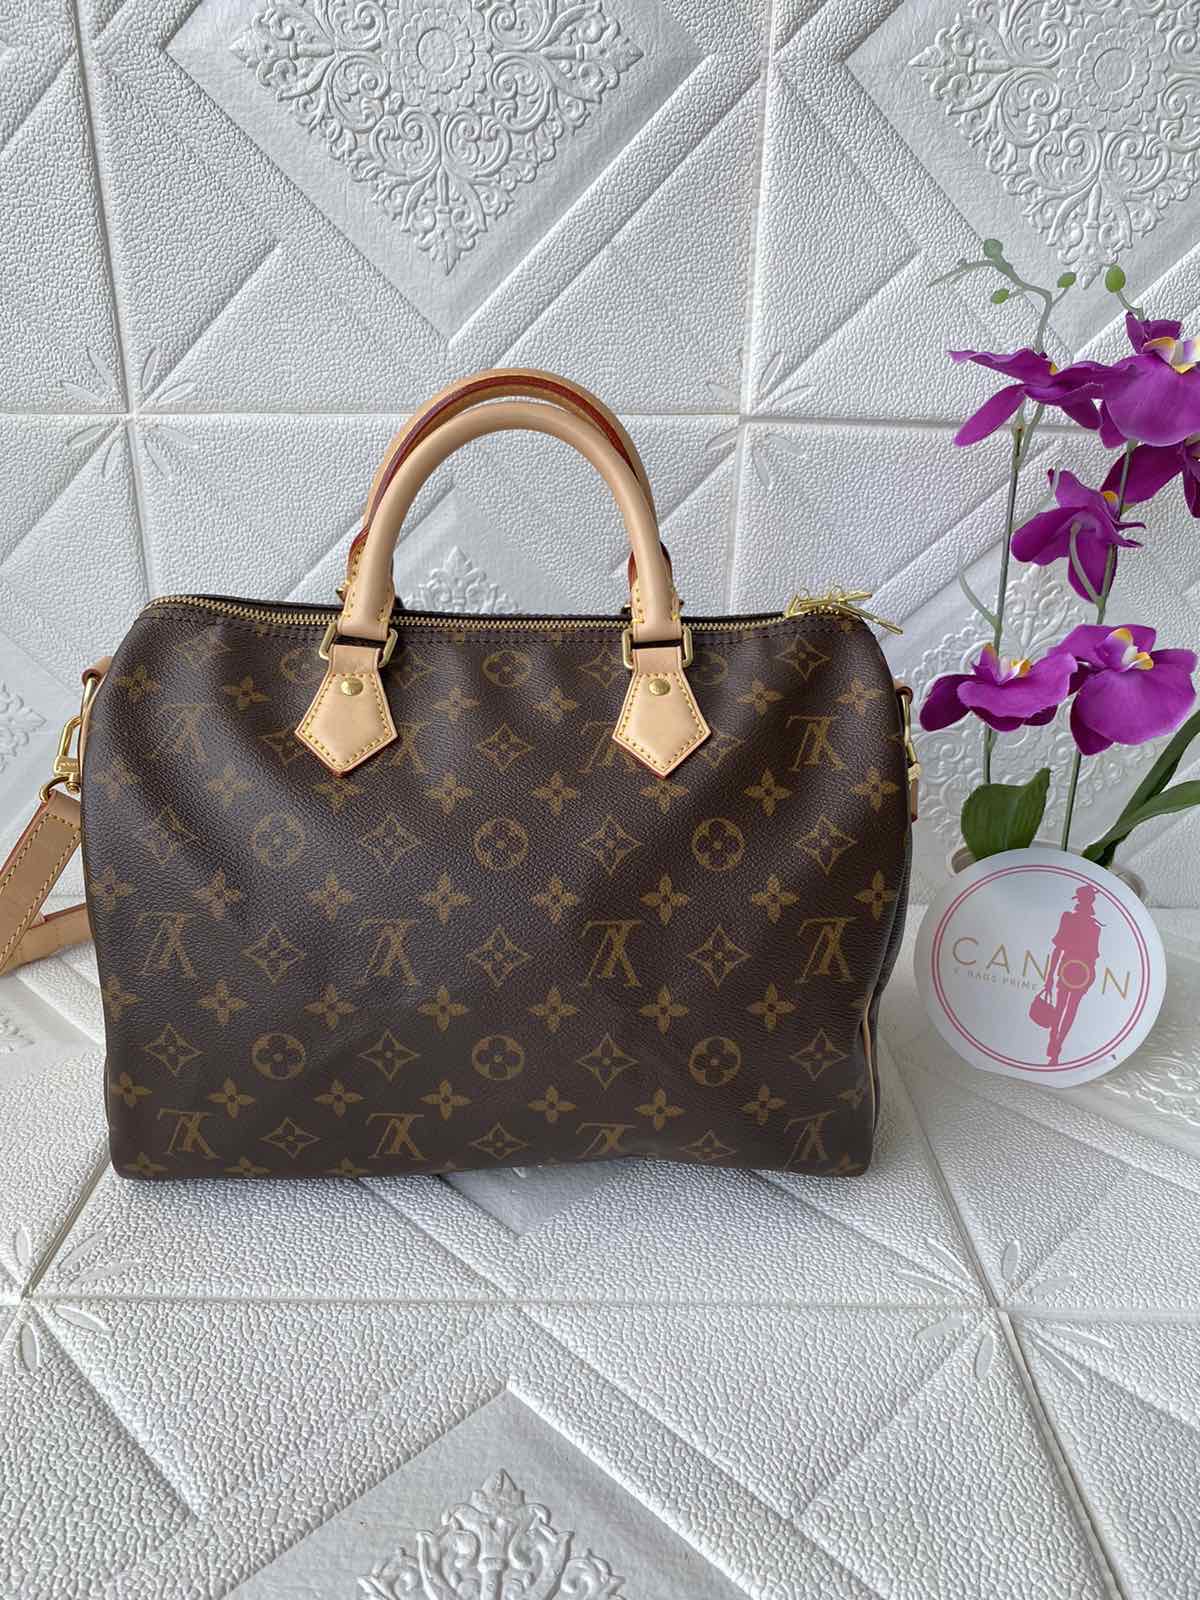 From Louis Vuitton Speedy 30 To LV Artsy Mm, And House Chores